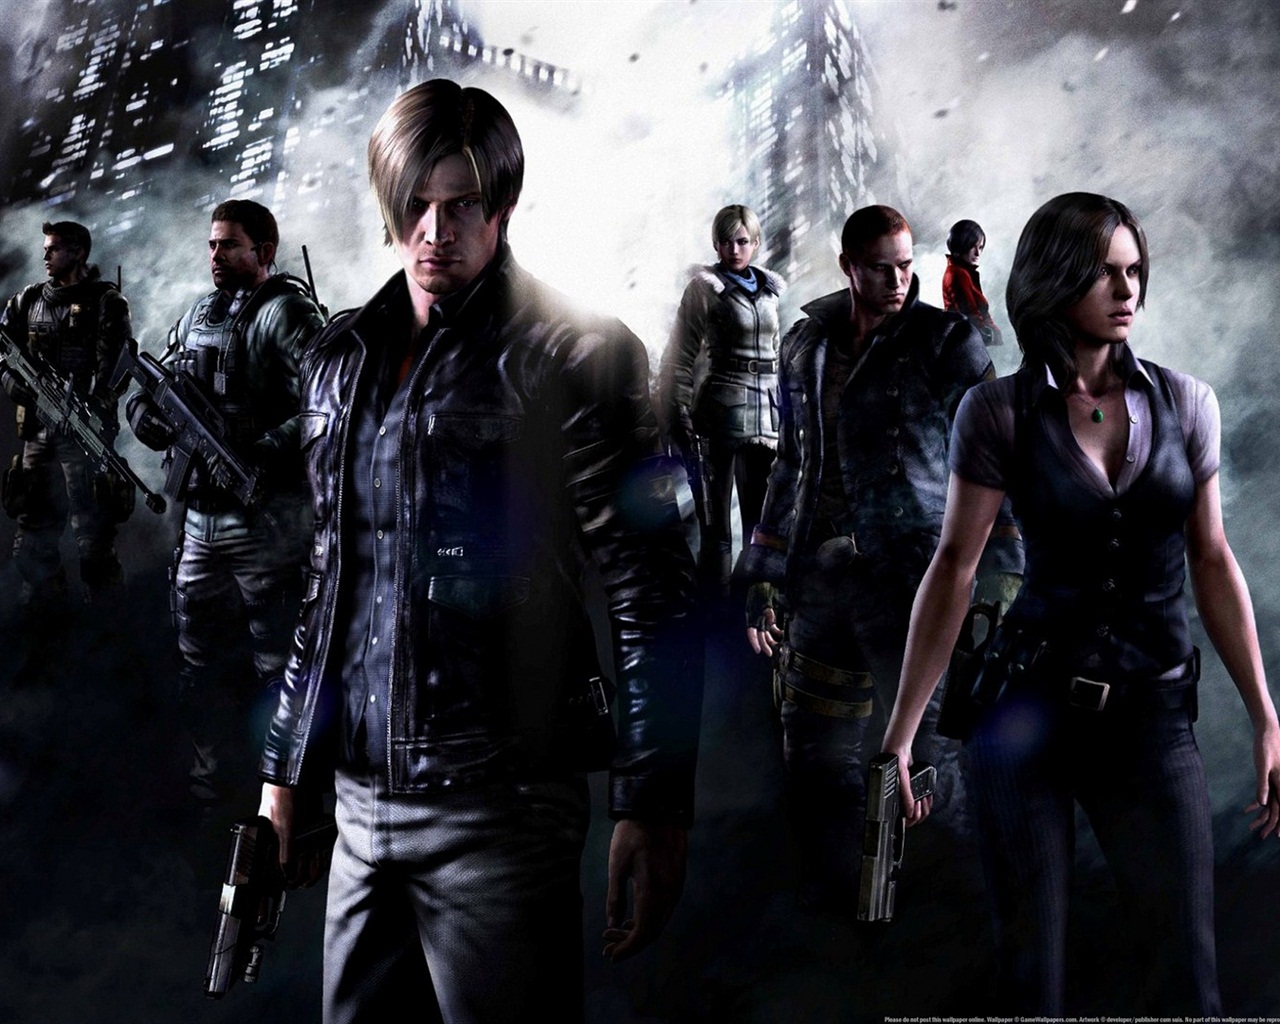 Resident Evil 6 HD game wallpapers #1 - 1280x1024